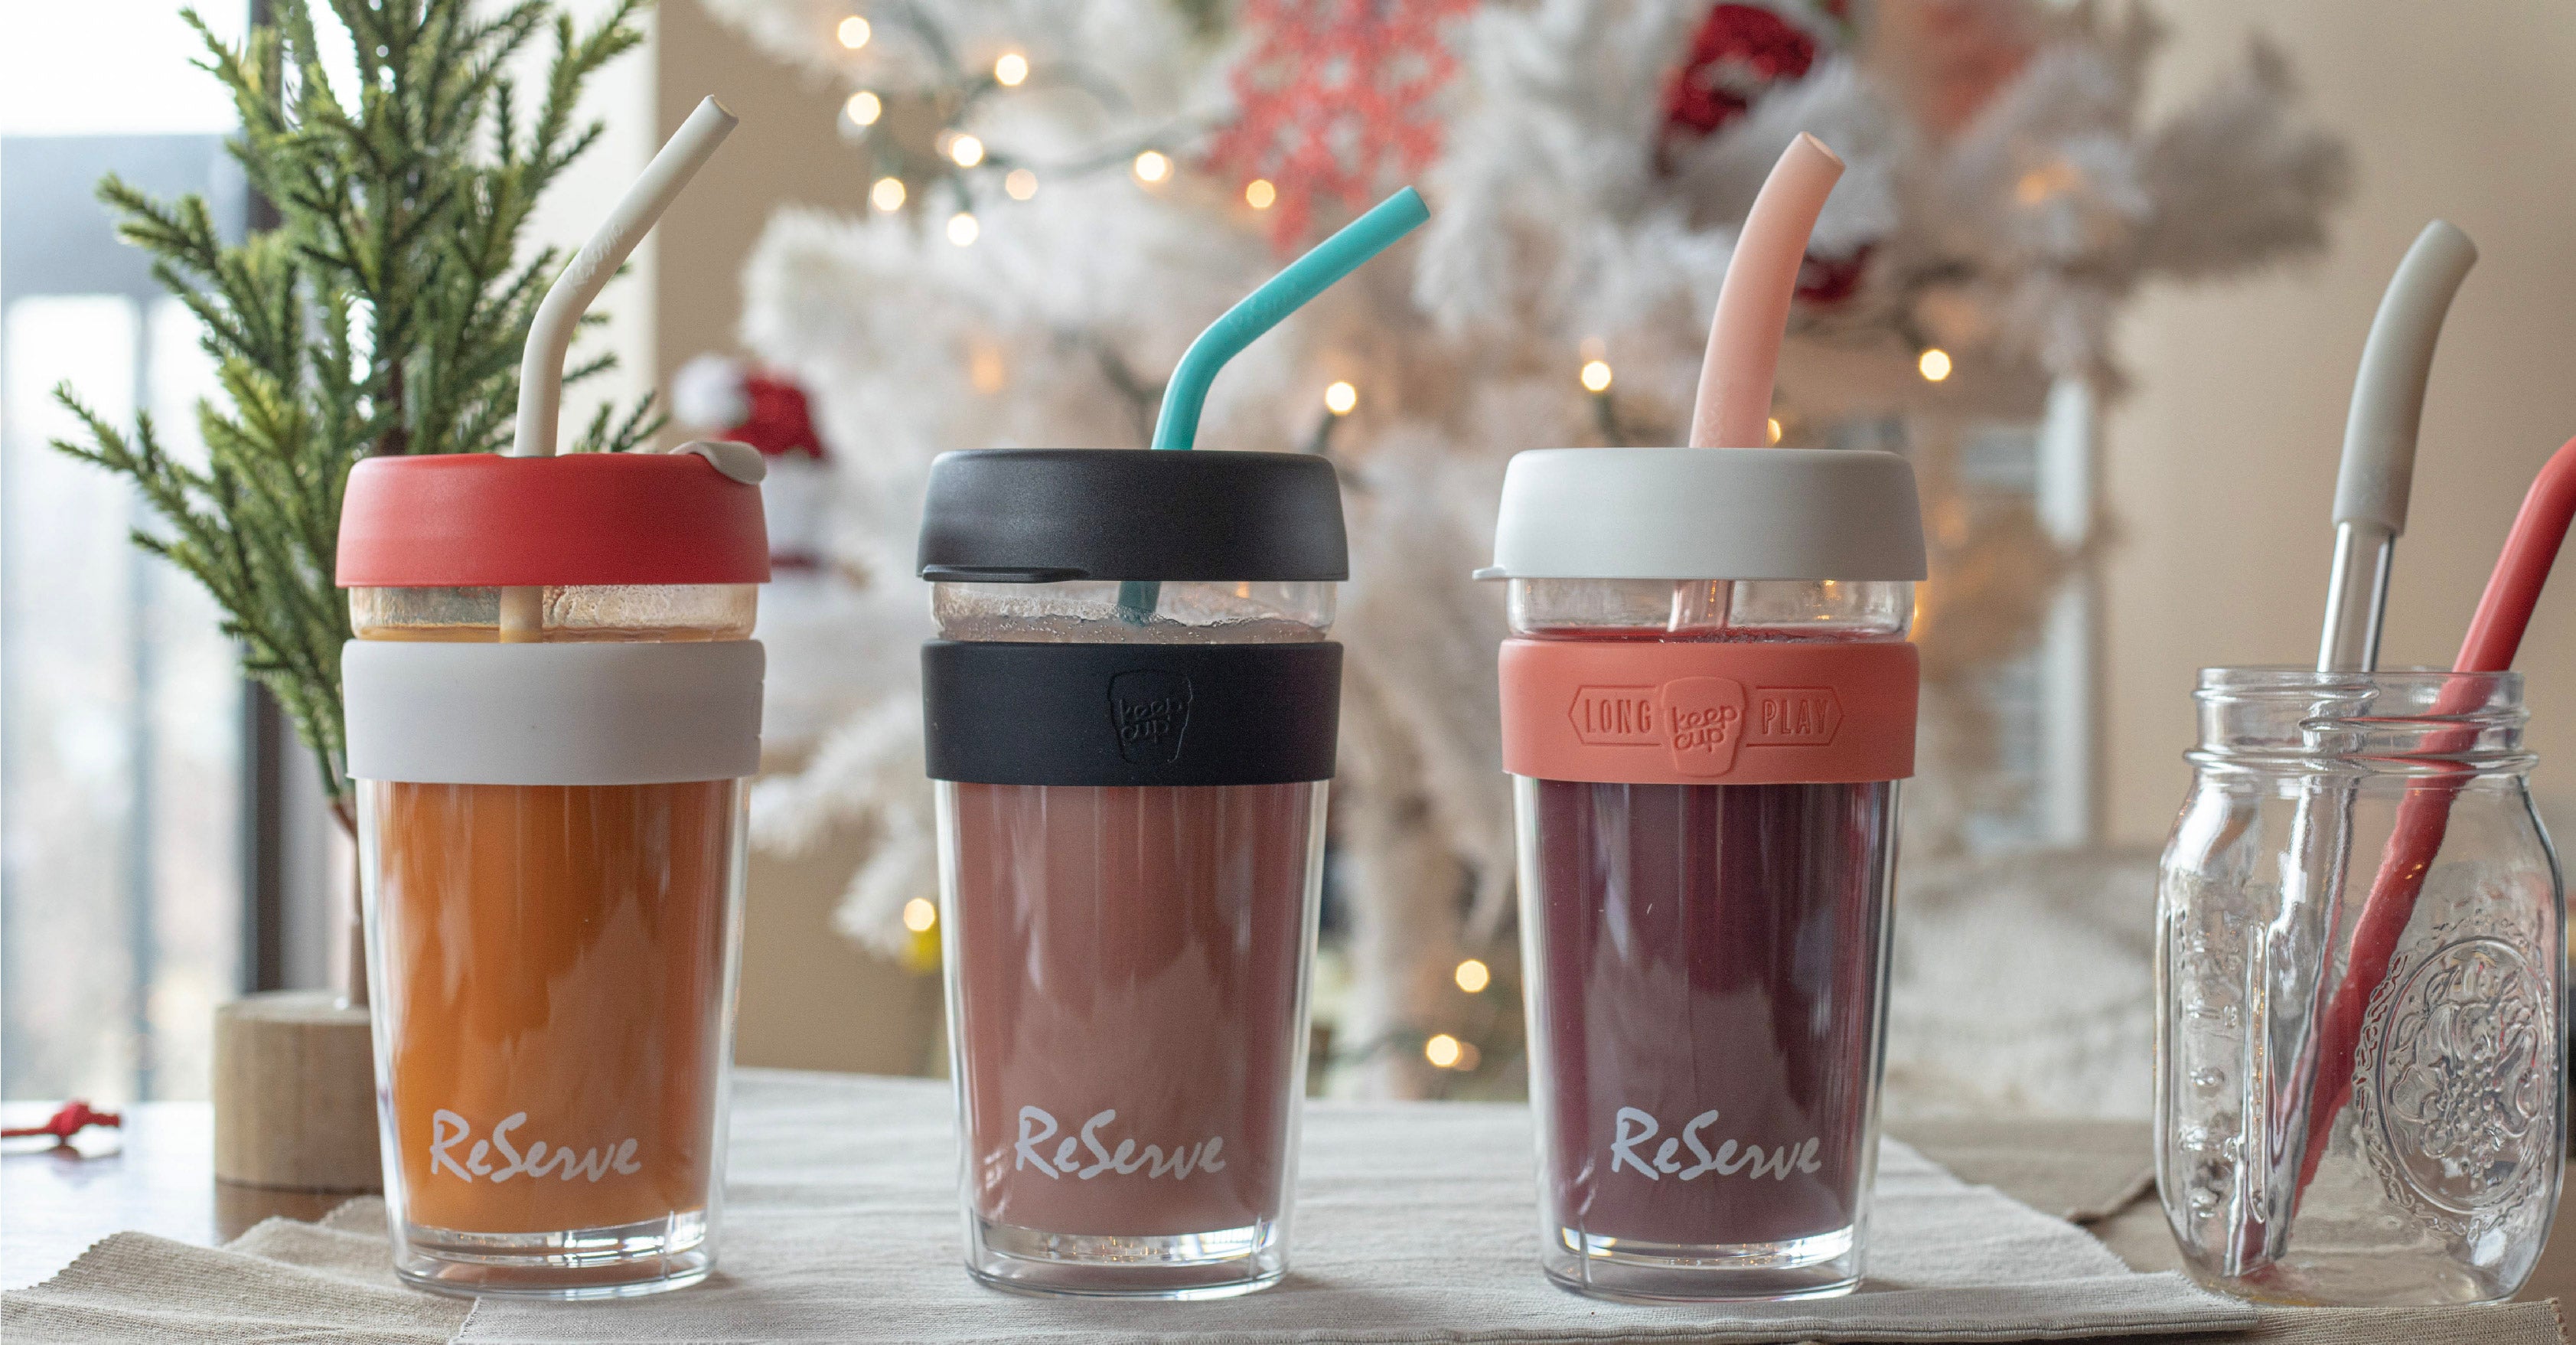 3 ReServ reusable straws in 3 KeepCup filled with fruity drinks